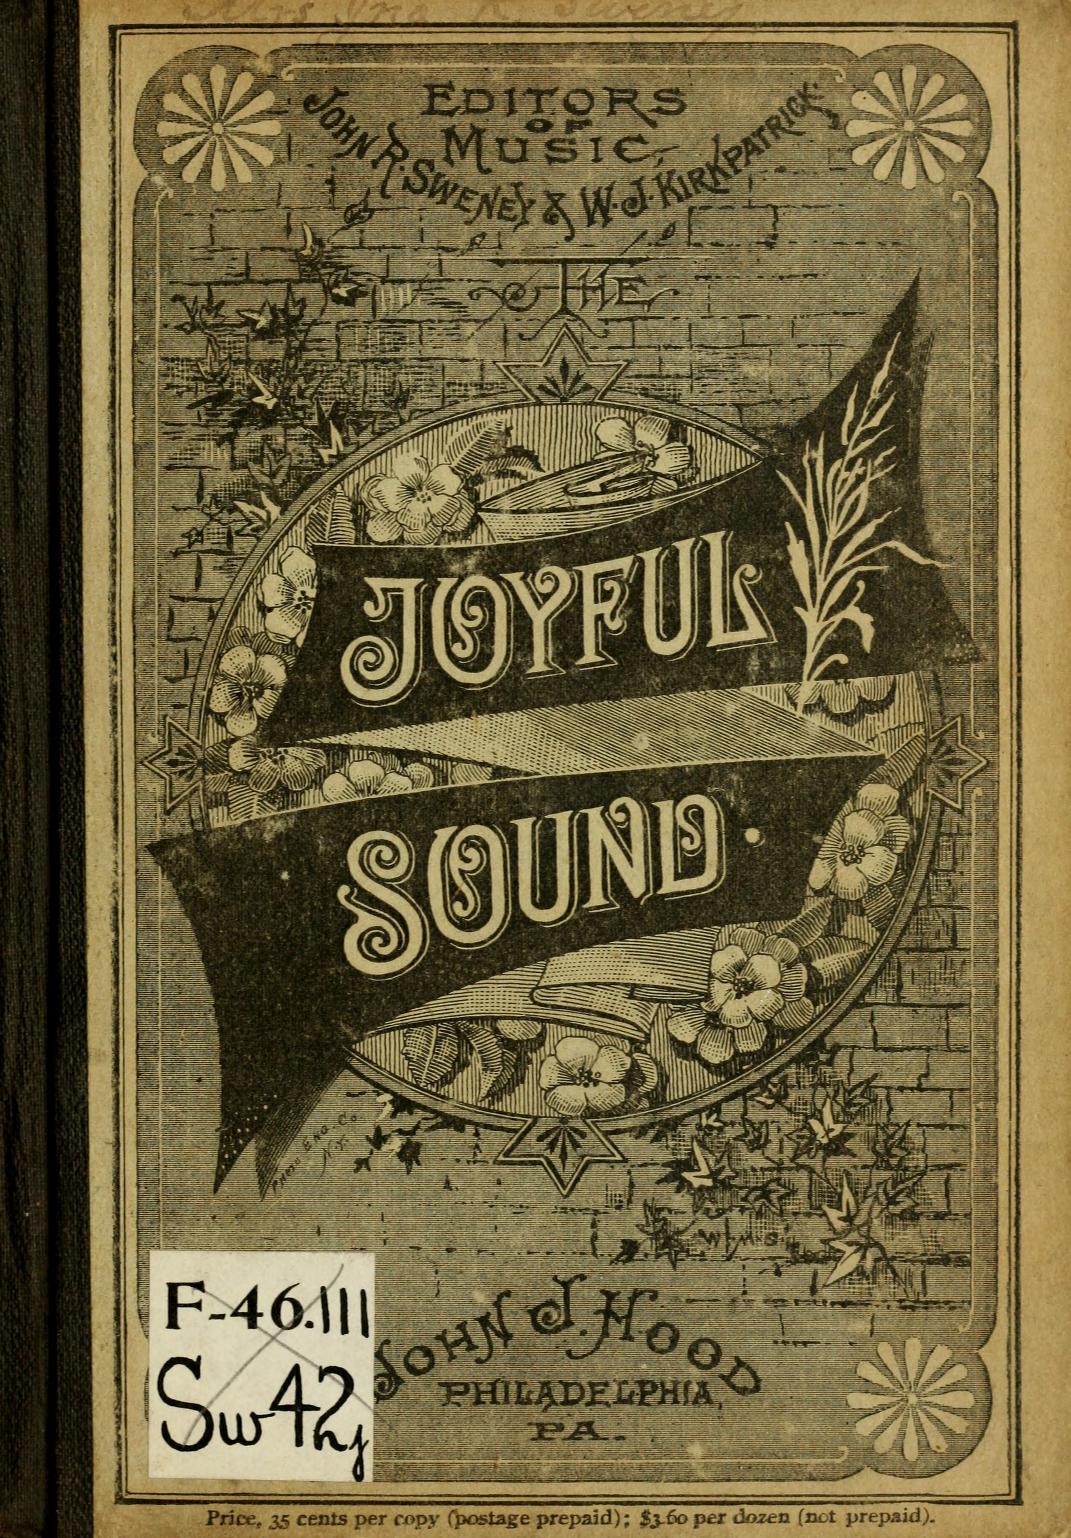 Joyful Sound: a collection of new hymns and music with familiar